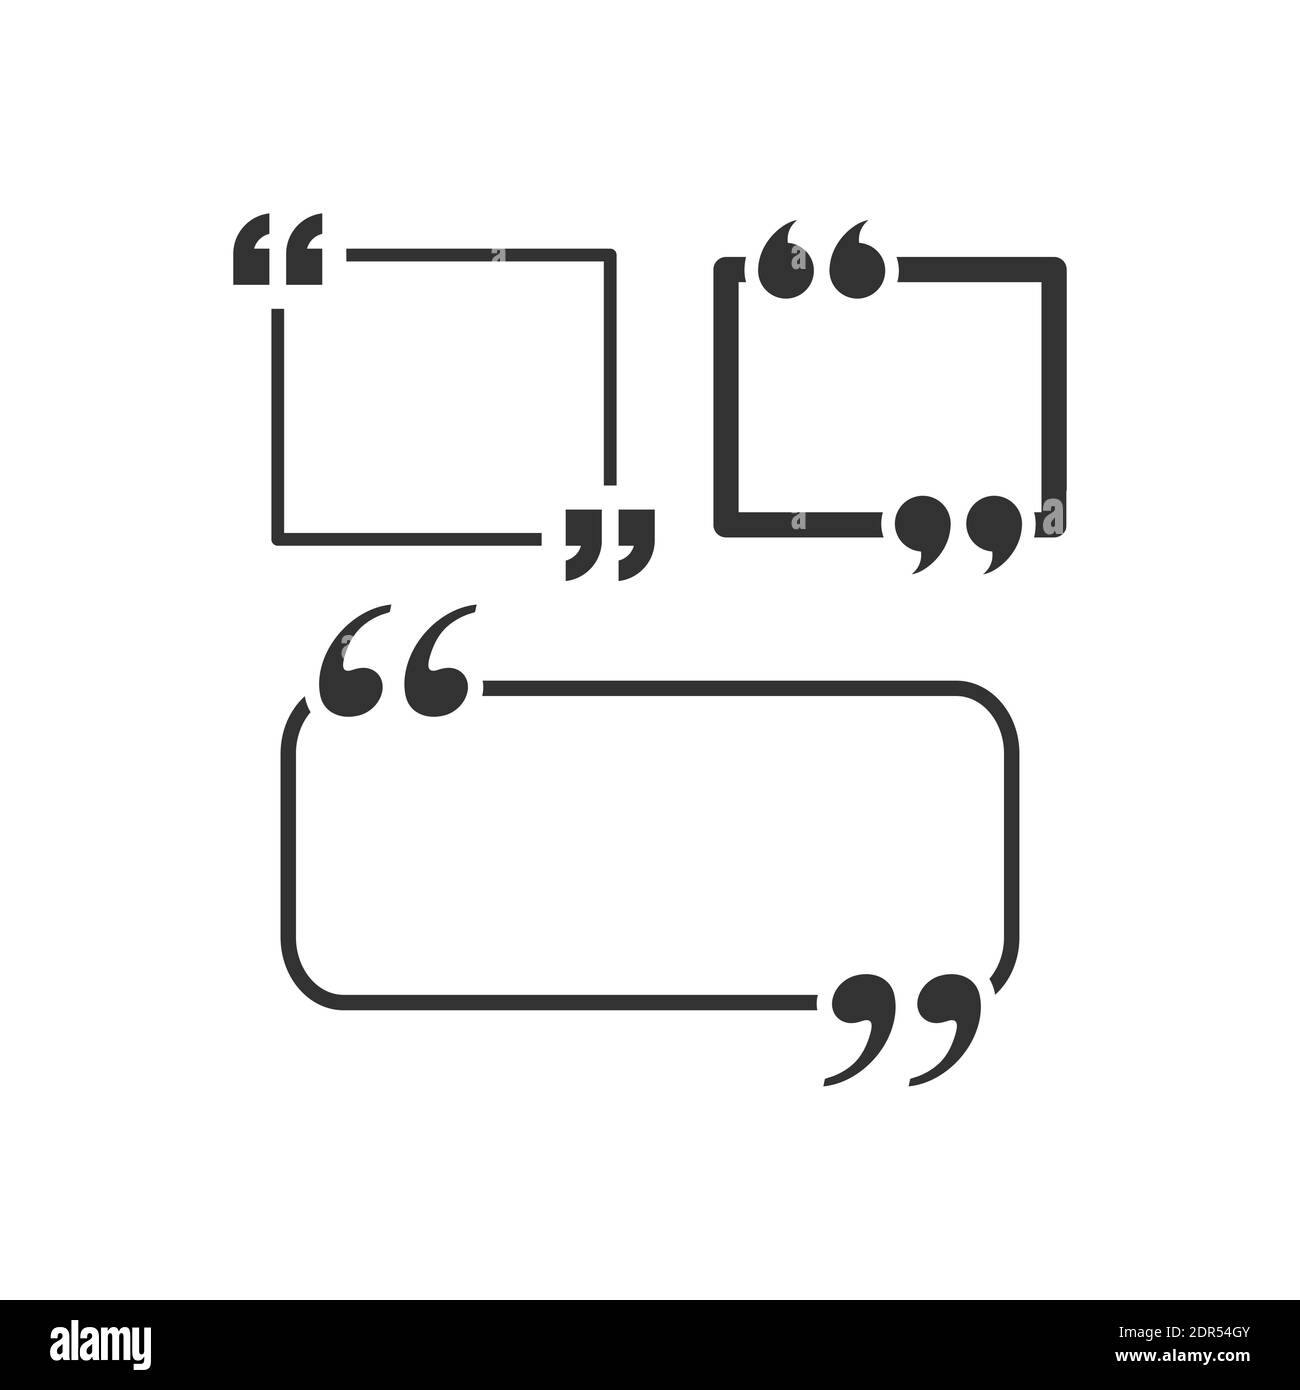 quotes-frame-black-vector-icon-set-quote-template-glyph-symbols-stock